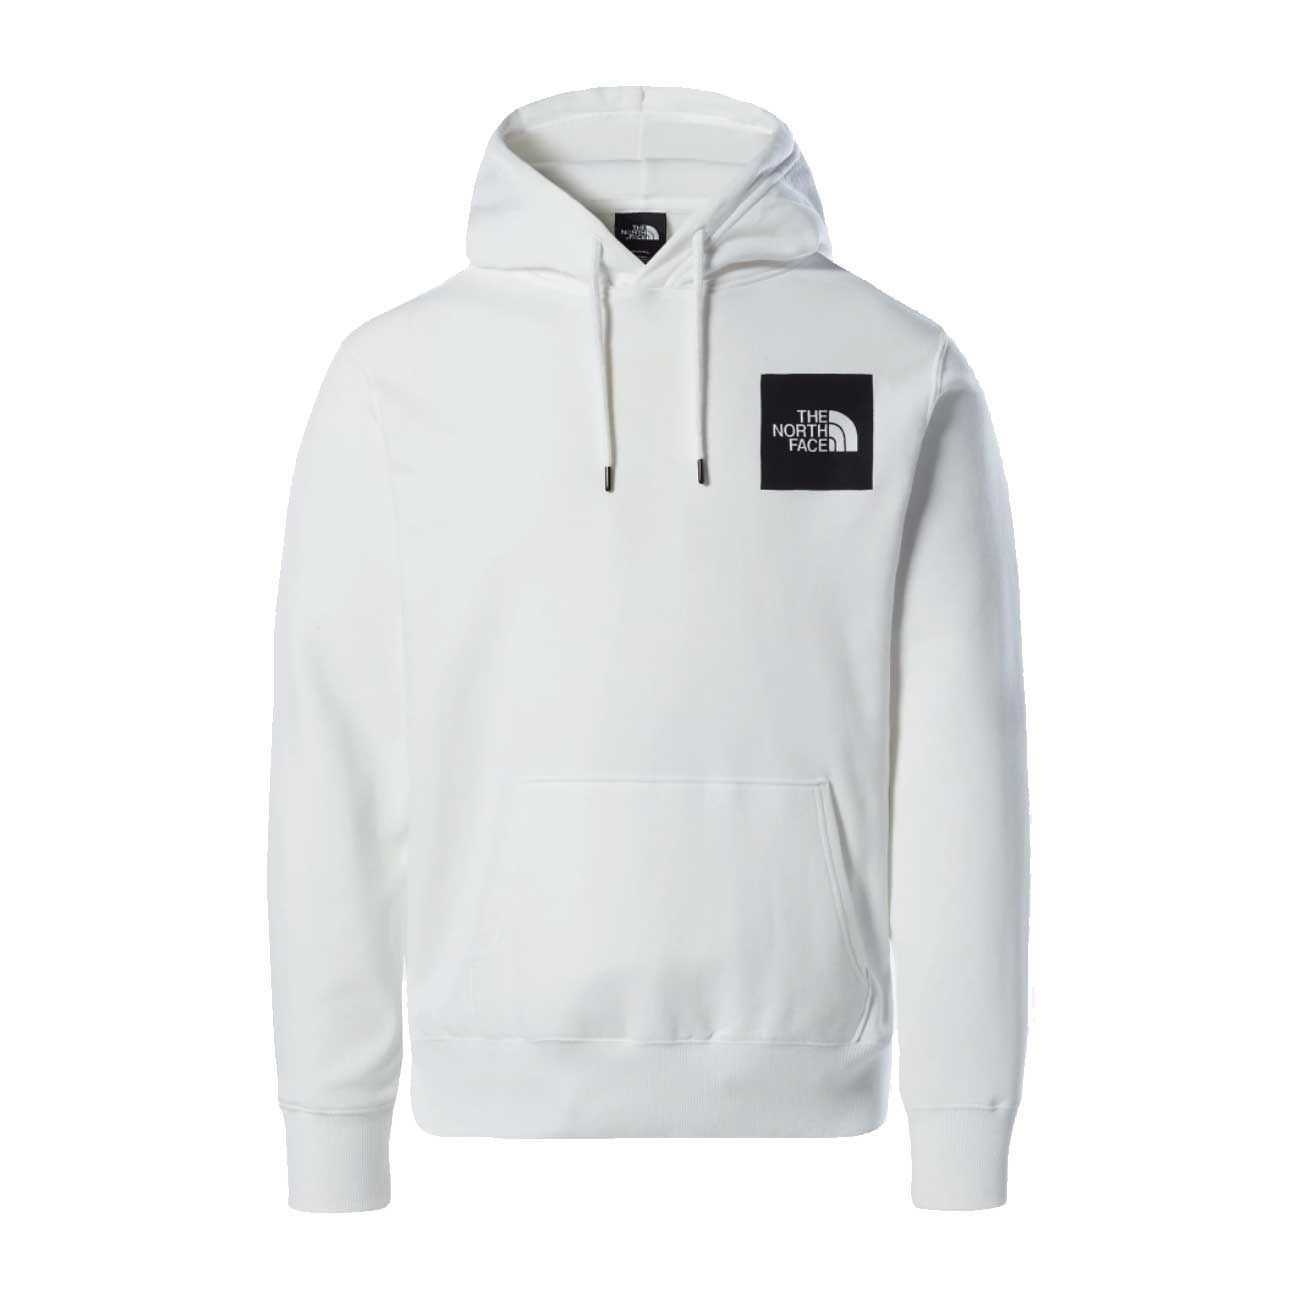 THE NORTH FACE HOODIE Man White | Store